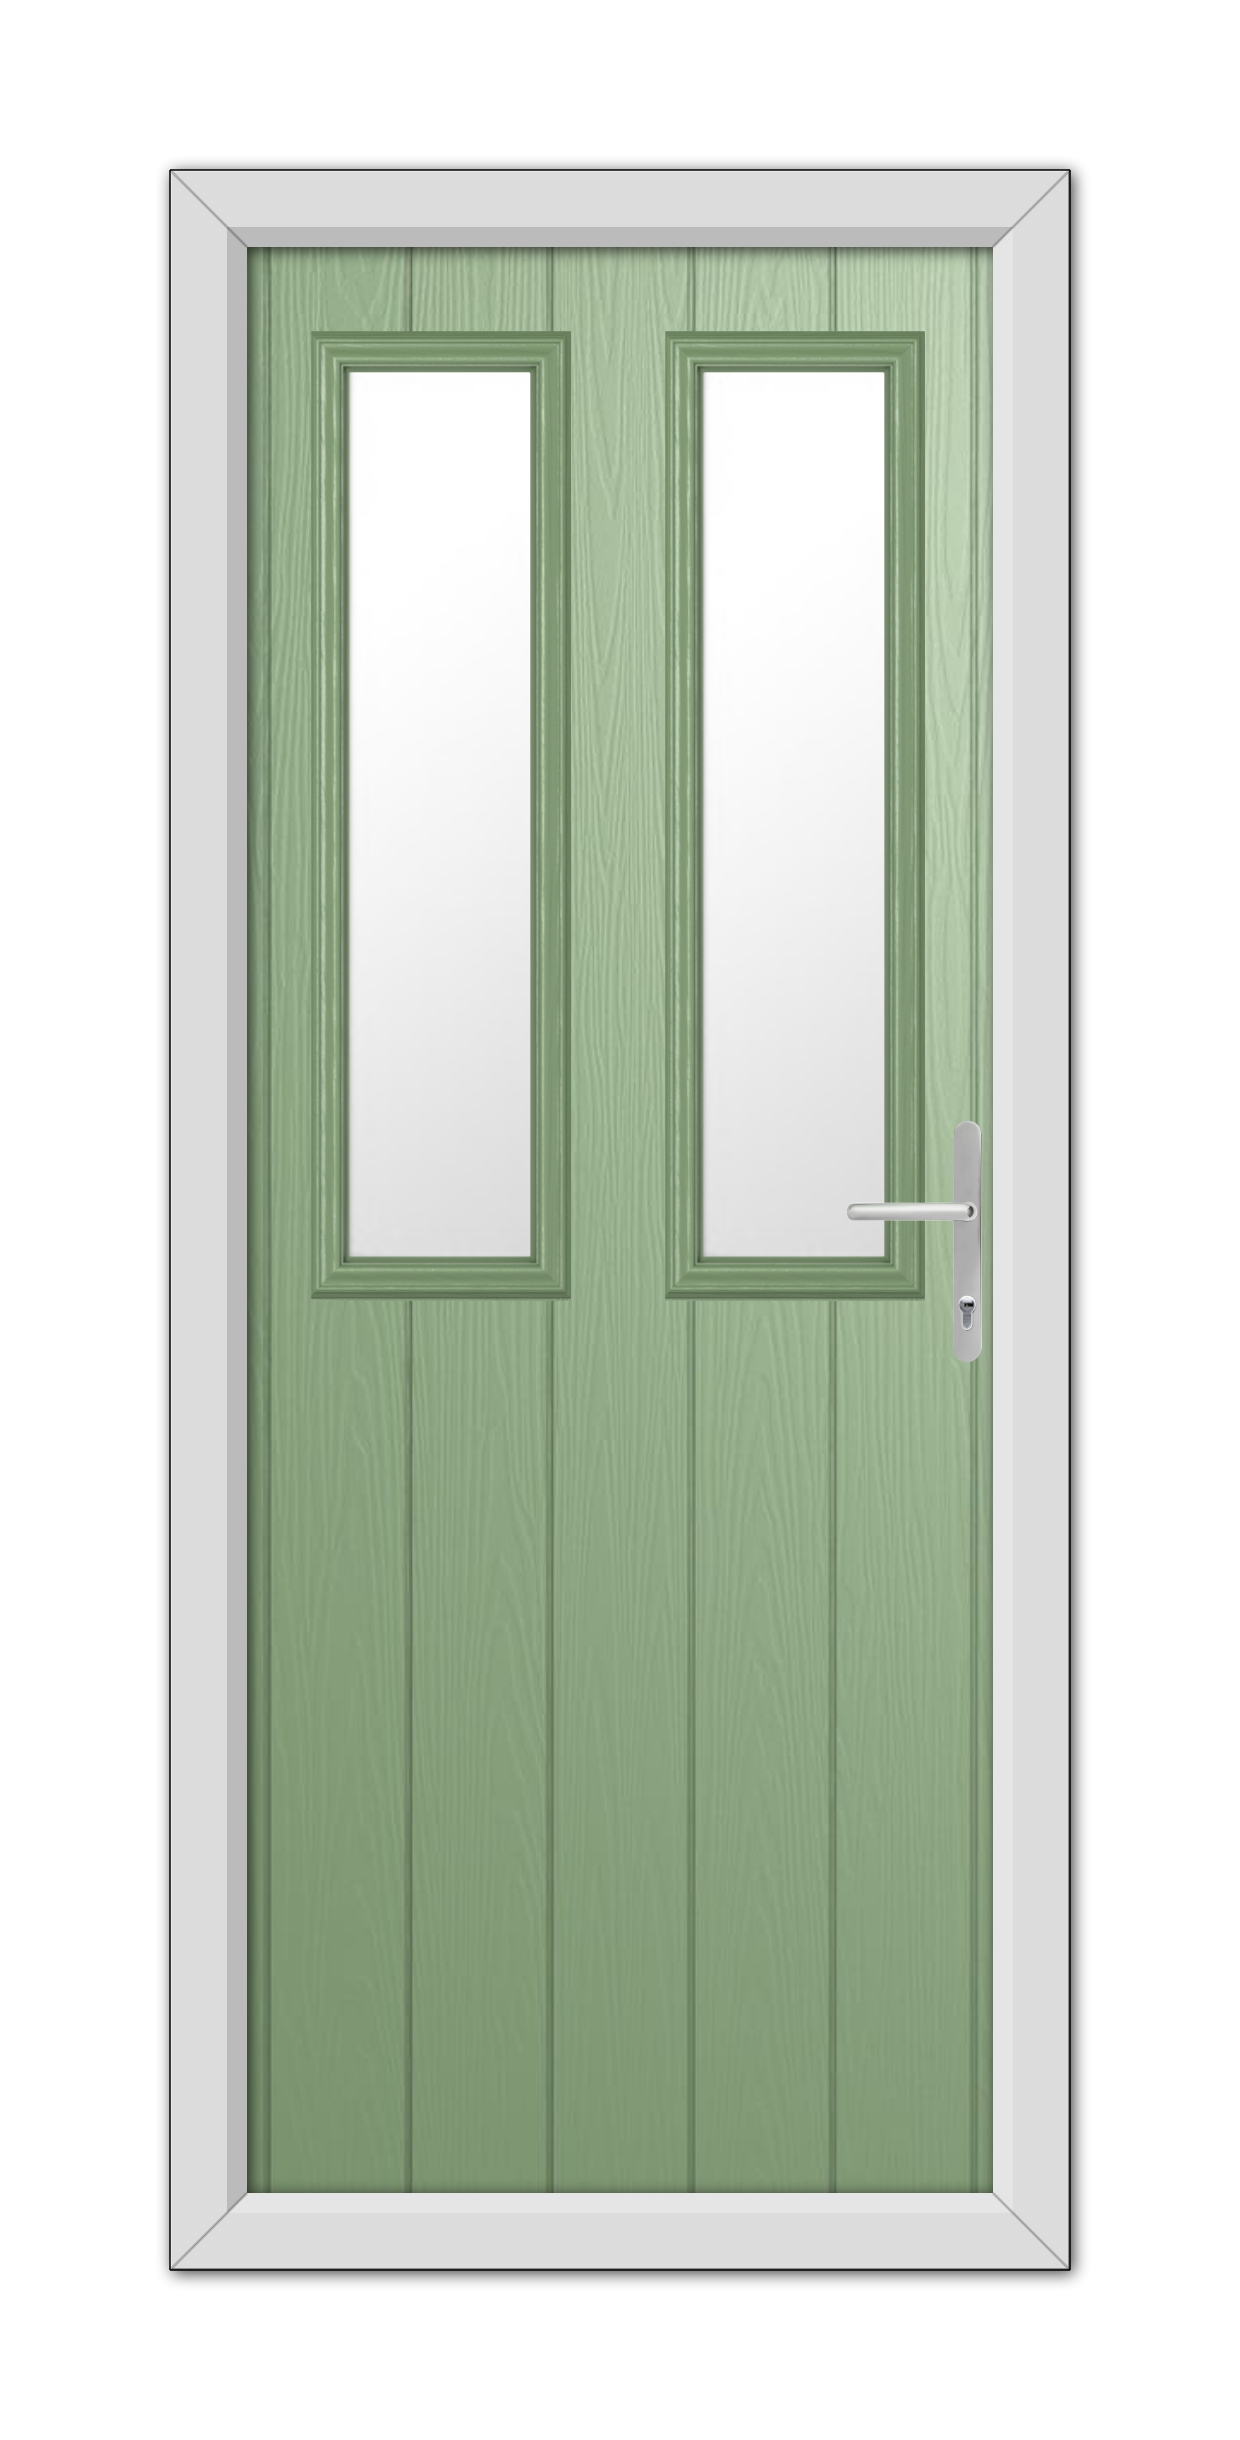 A modern Chartwell Green Wellington Composite Door with rectangular windows and a silver handle, set in a white frame.